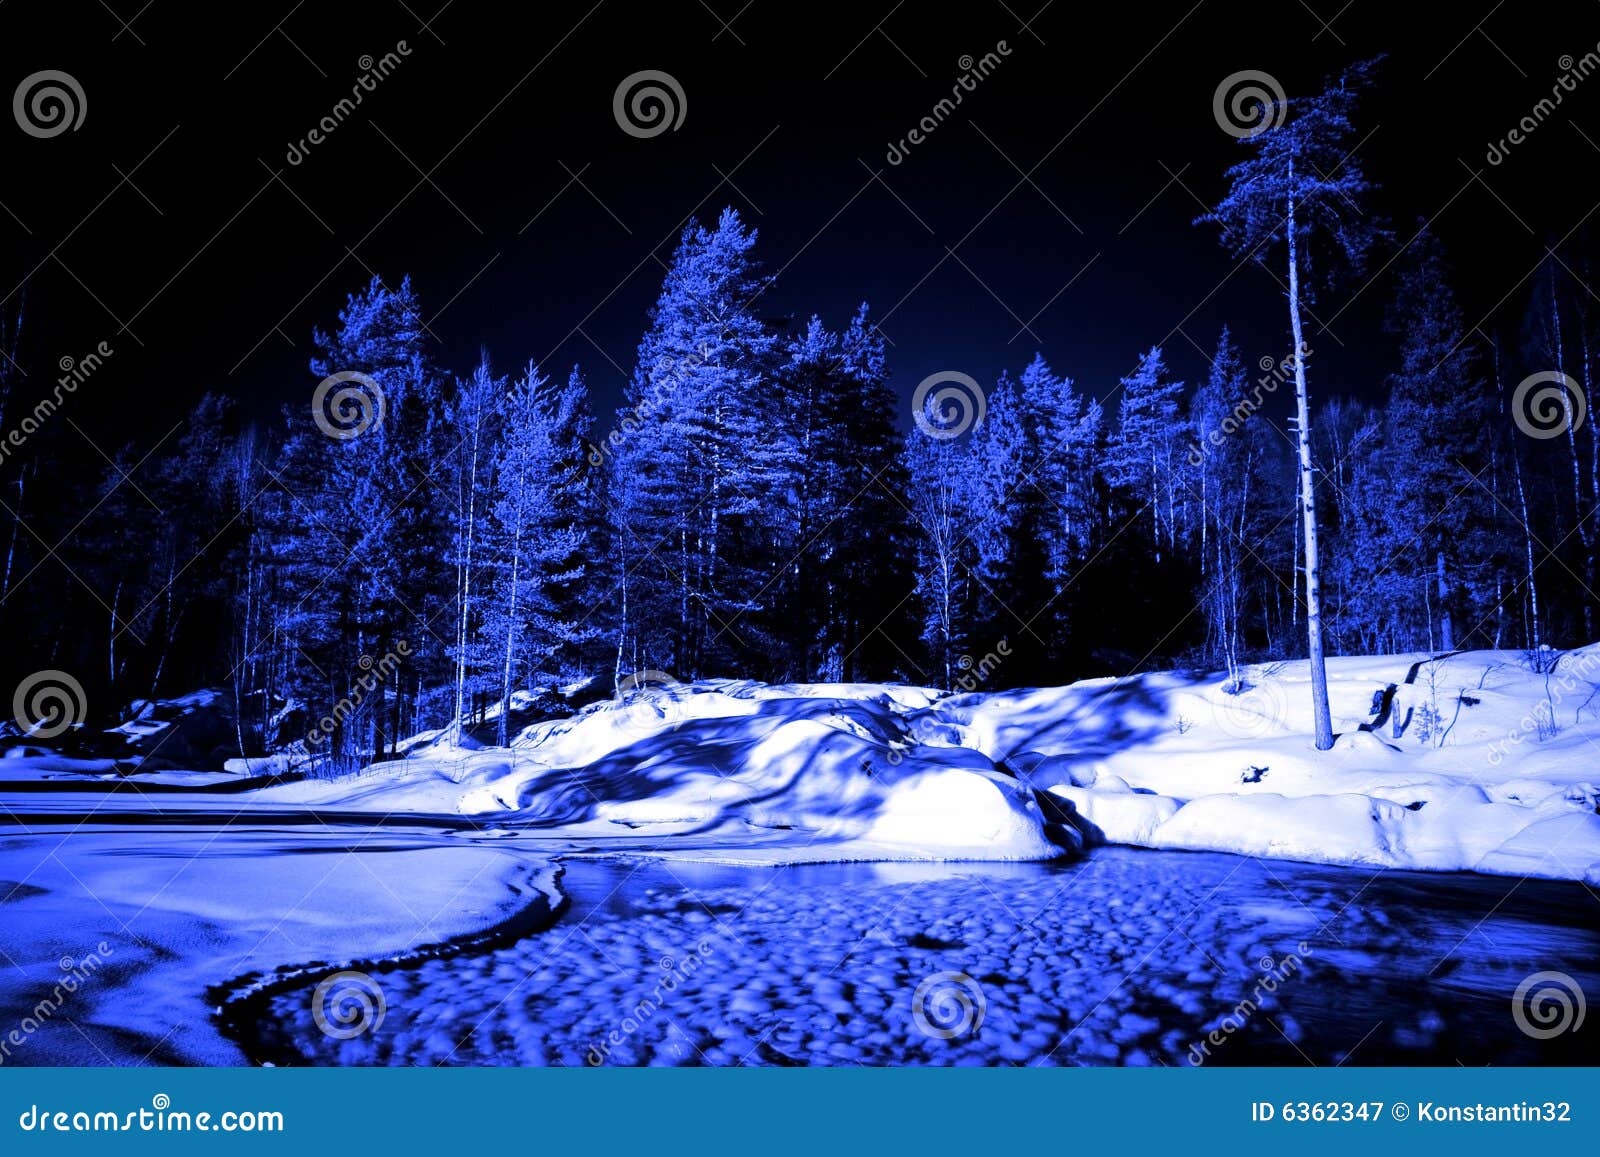 3 453 Winter Forest Night Snowflake Photos Free Royalty Free Stock Photos From Dreamstime